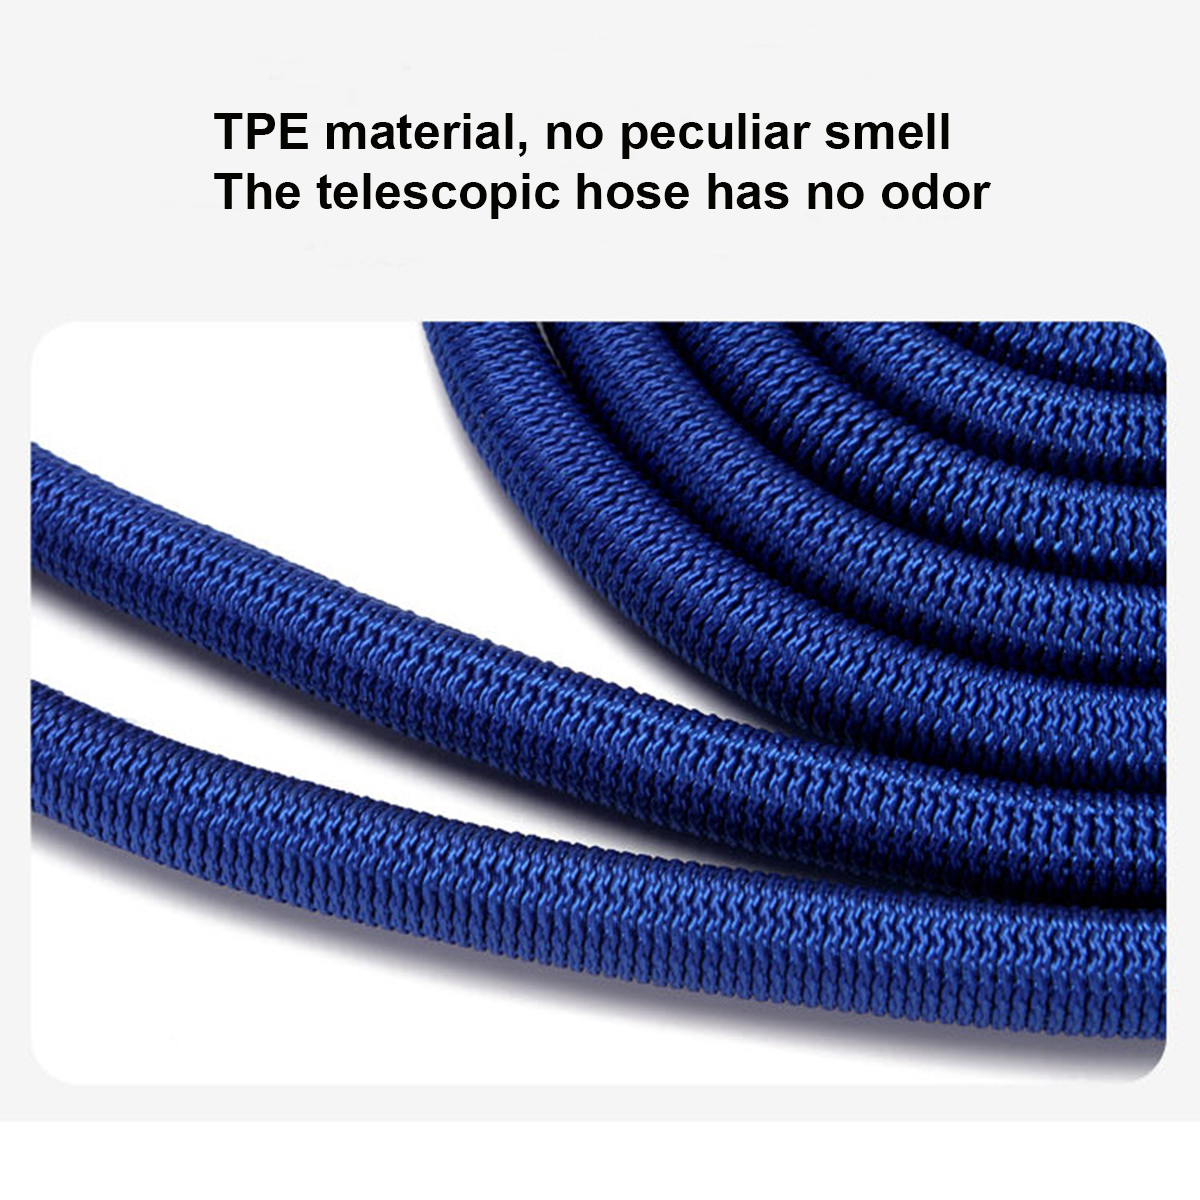 25-100ft-Expandable-Flexible-Garden-Water-Hose-Water-Pipe-Watering-Sprayer-1807508-7